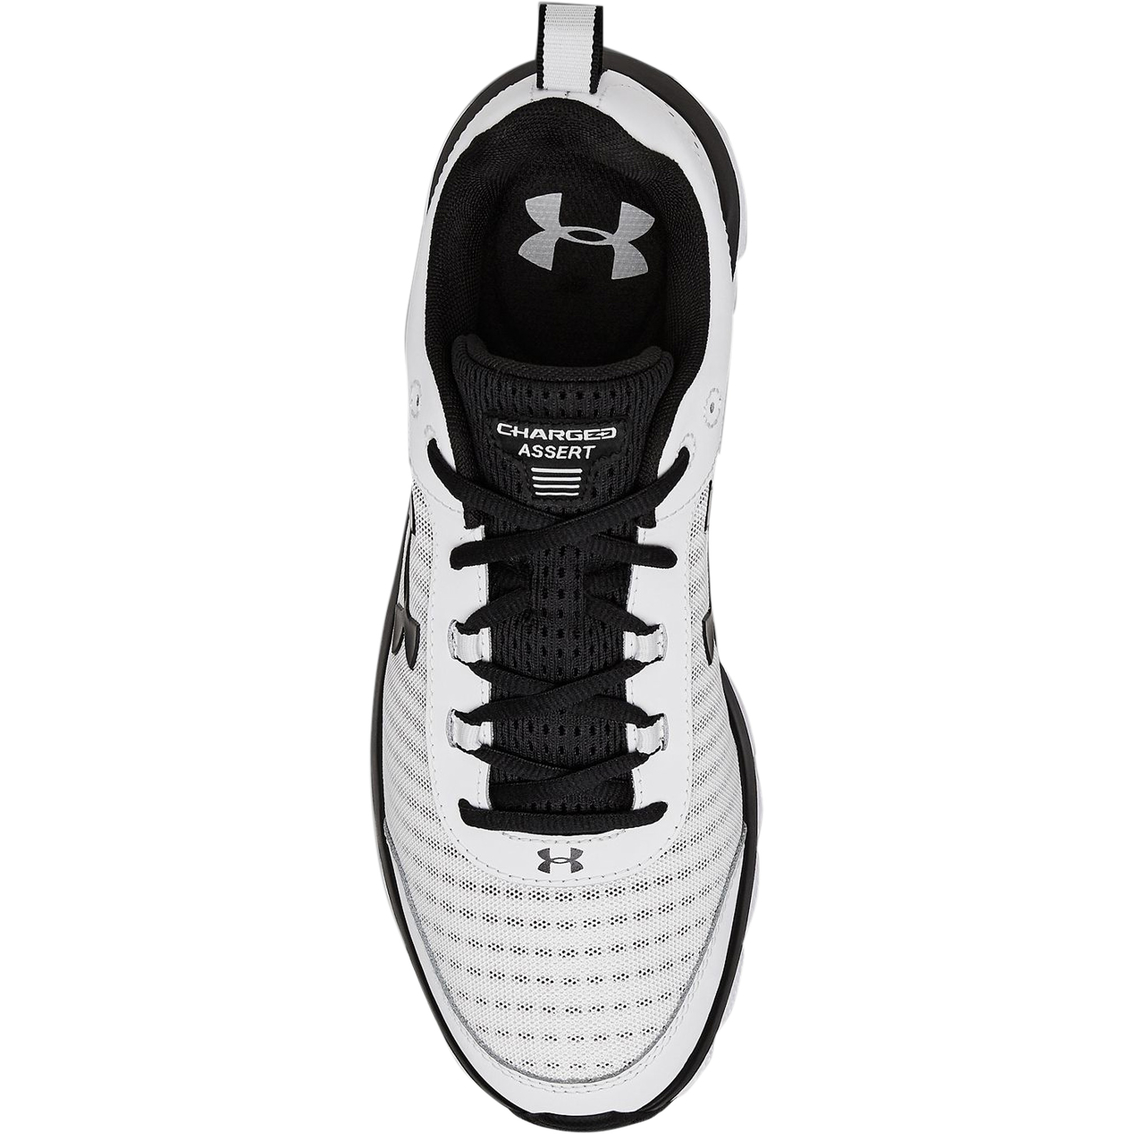 Under Armour Men's Charged Assert Running Shoes, Running, Shoes